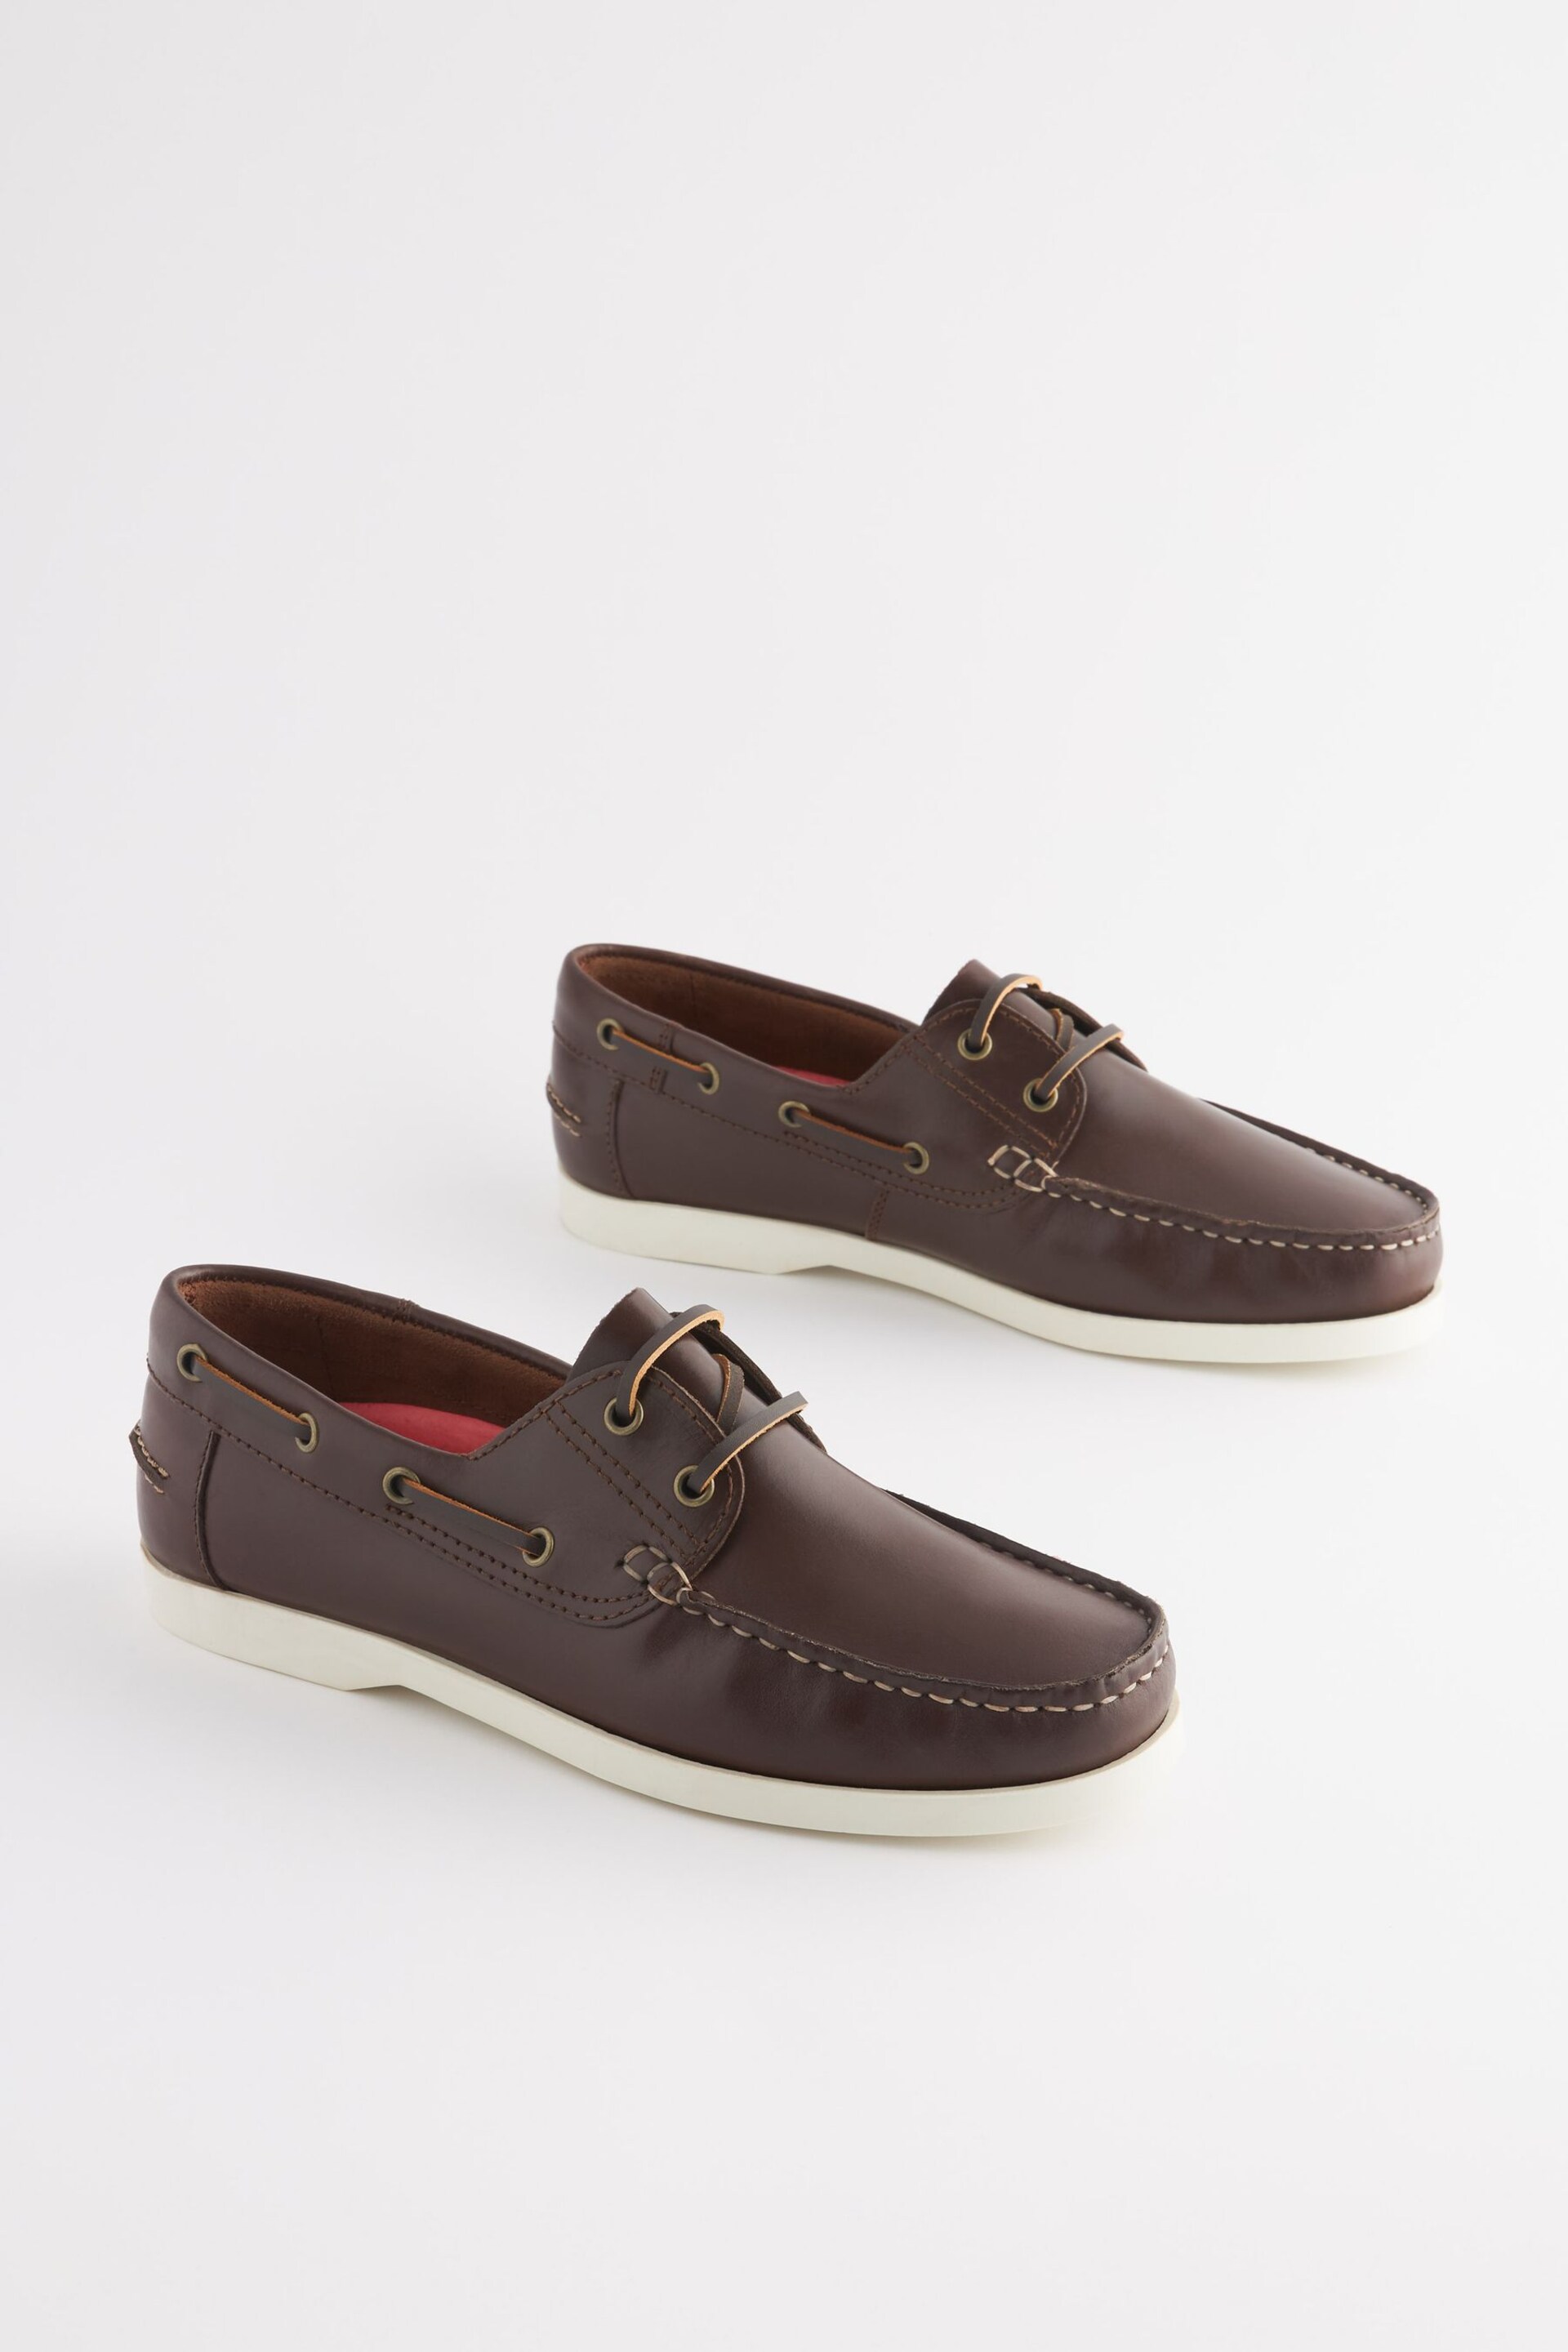 Brown Wide Fit Classic Boat Shoes - Image 1 of 6